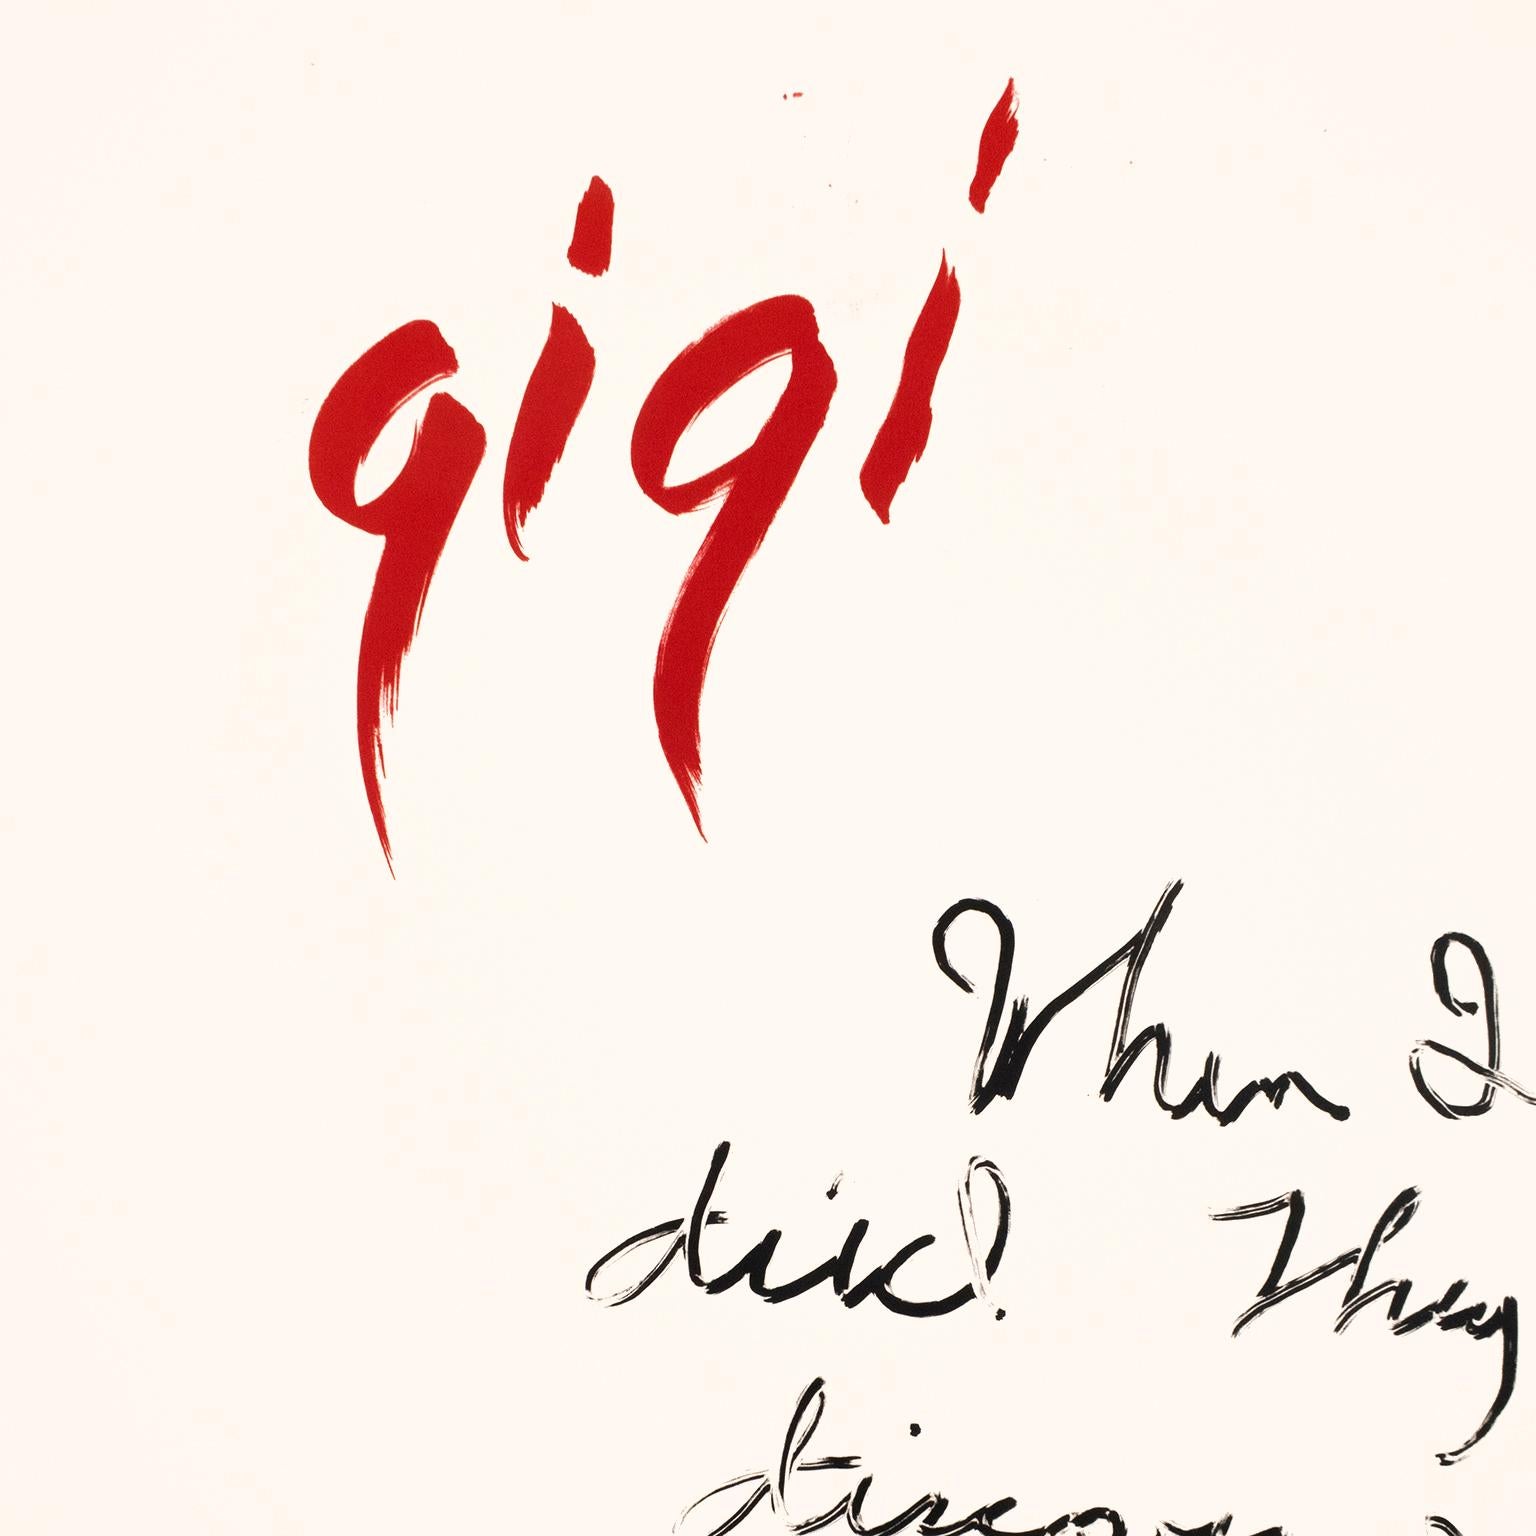 Rene Ricard Abstract Print - Gigi: red black abstract print with poetry based on 1950s vintage movie poster 